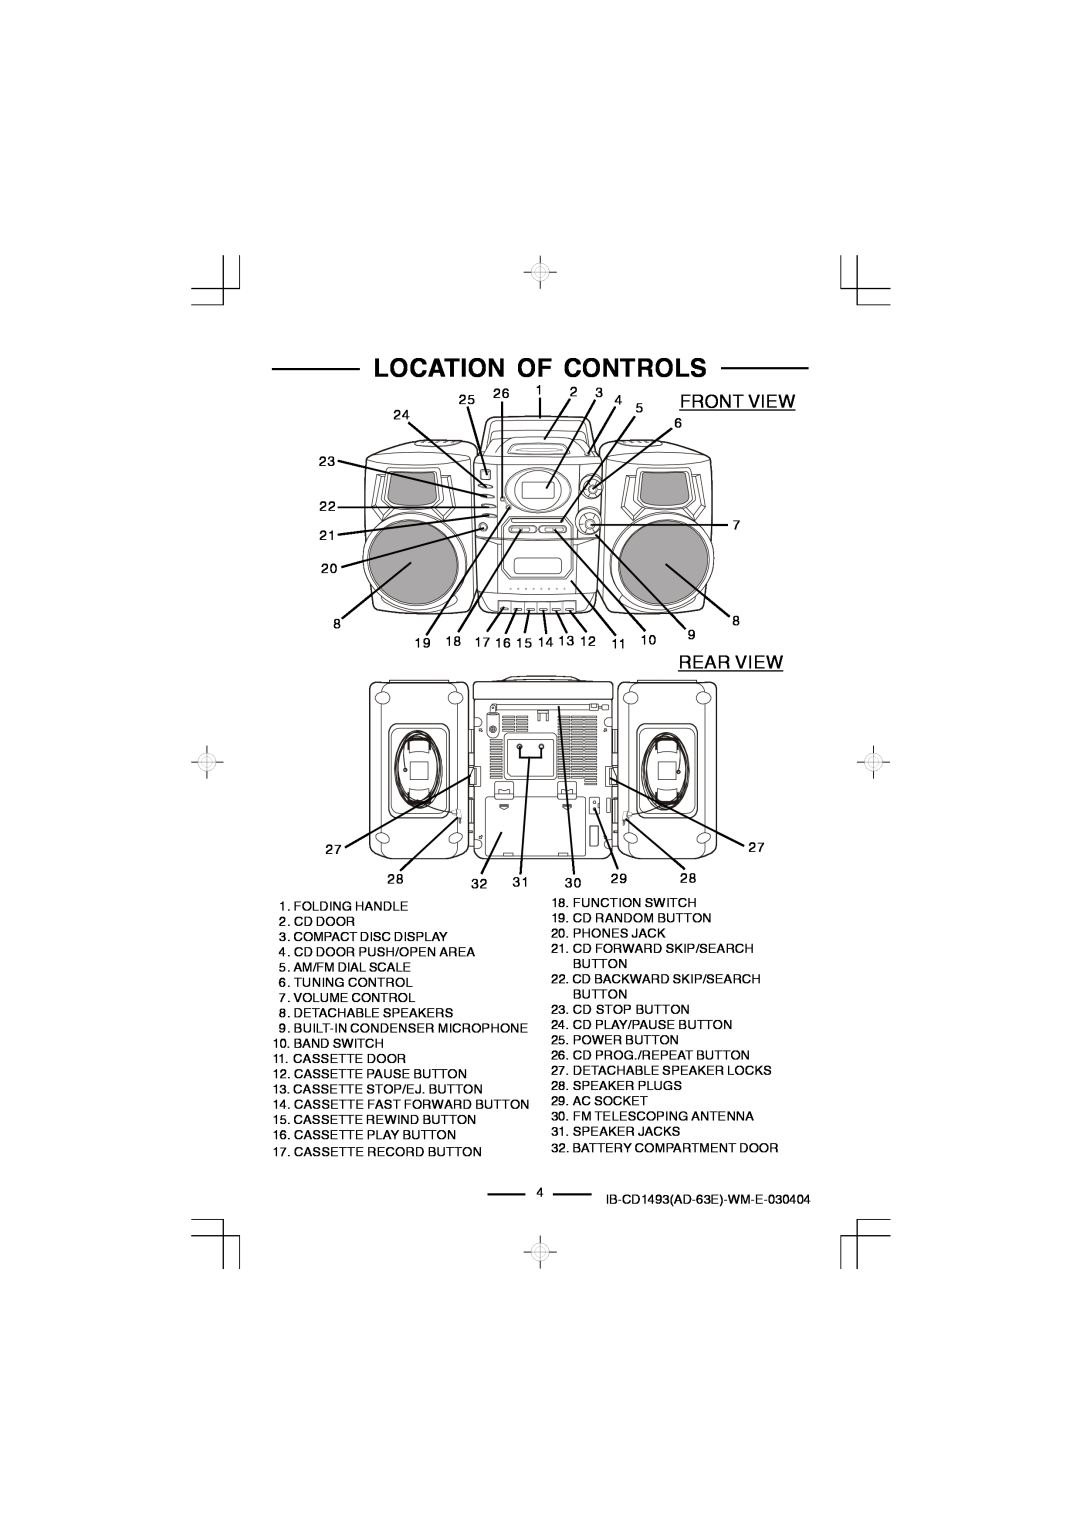 Lenoxx Electronics CD-1493 manual Front View, Rear View, Location Of Controls 